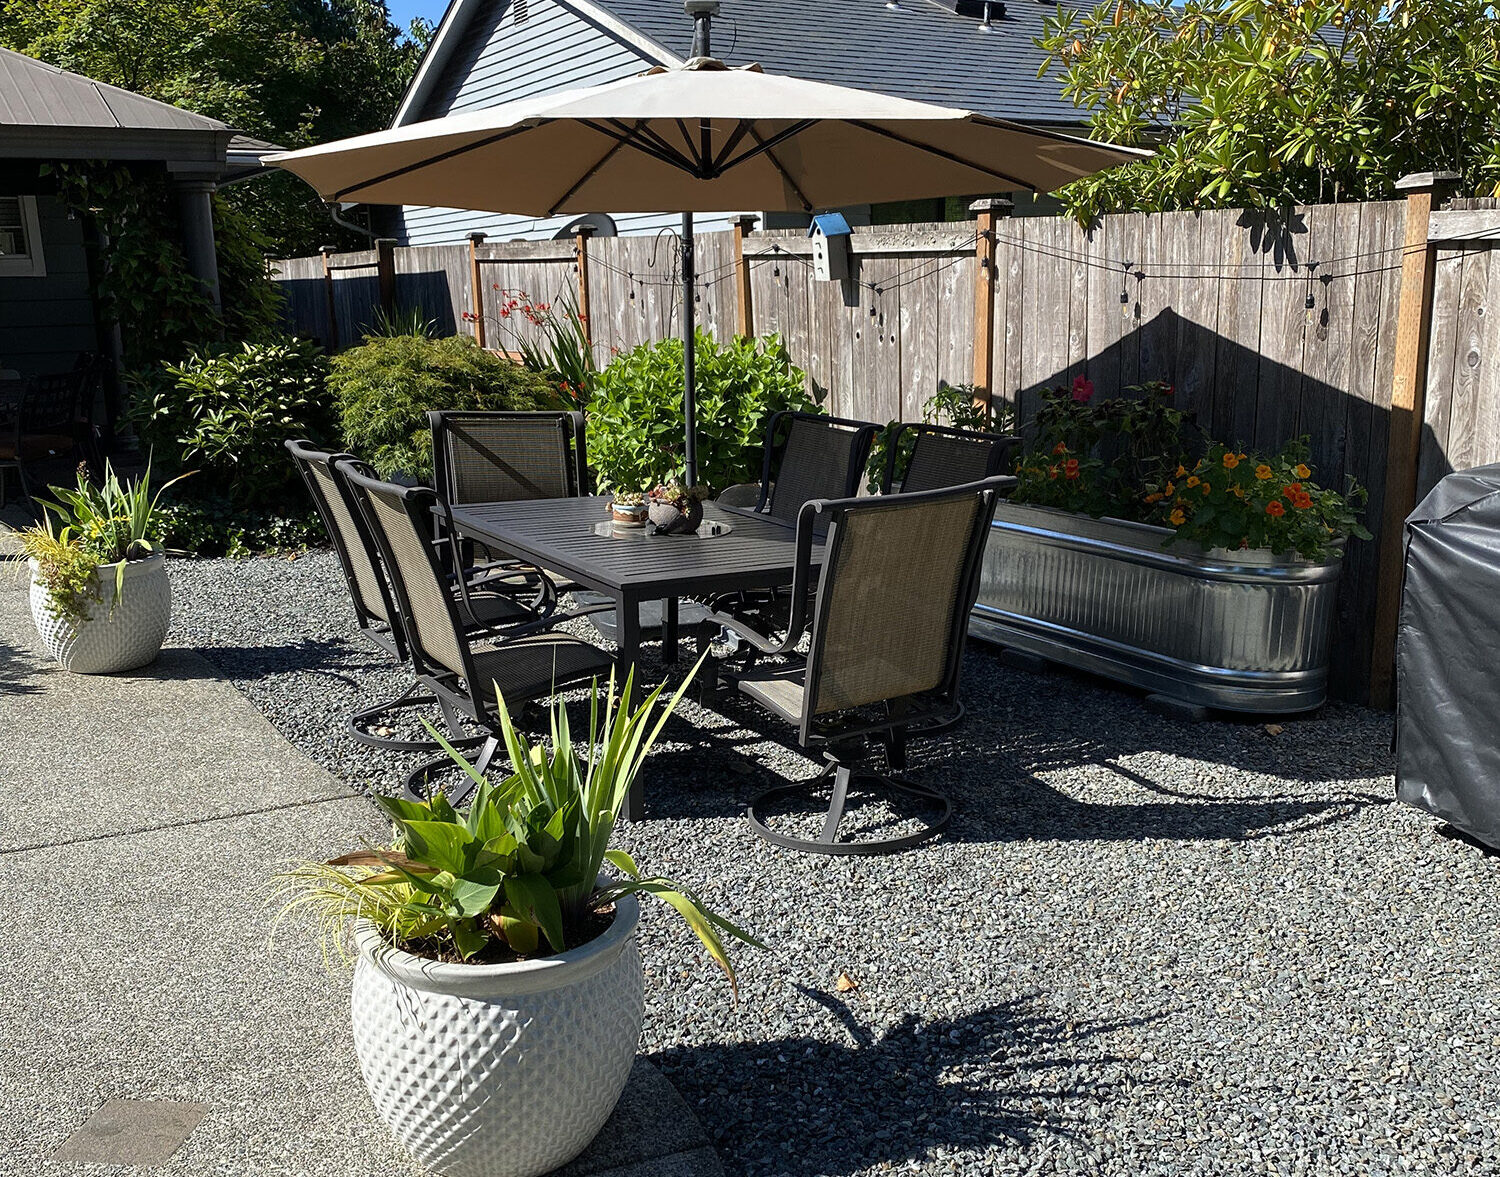 Photo of a backyard with potted plants, furniture, and gravel.